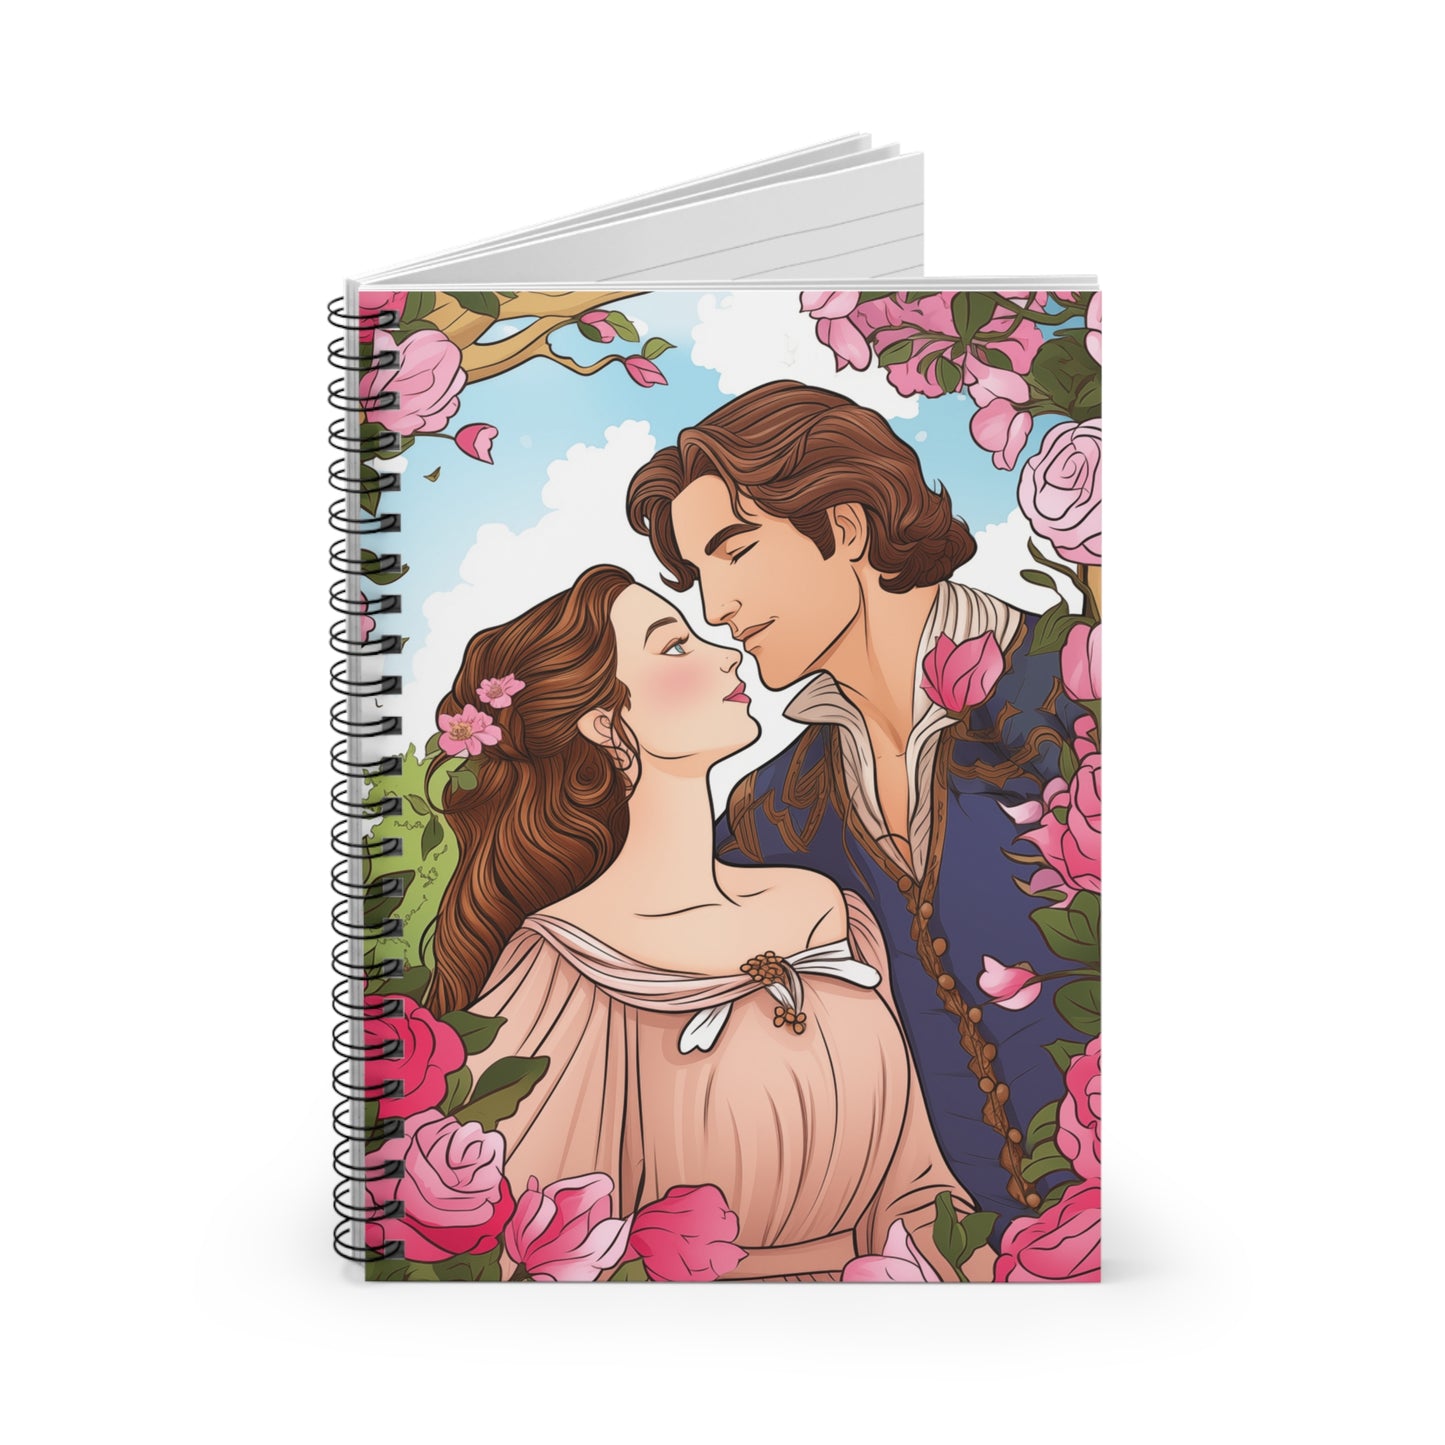 Historical Romance [February 2024] Spiral Notebook - Ruled Line